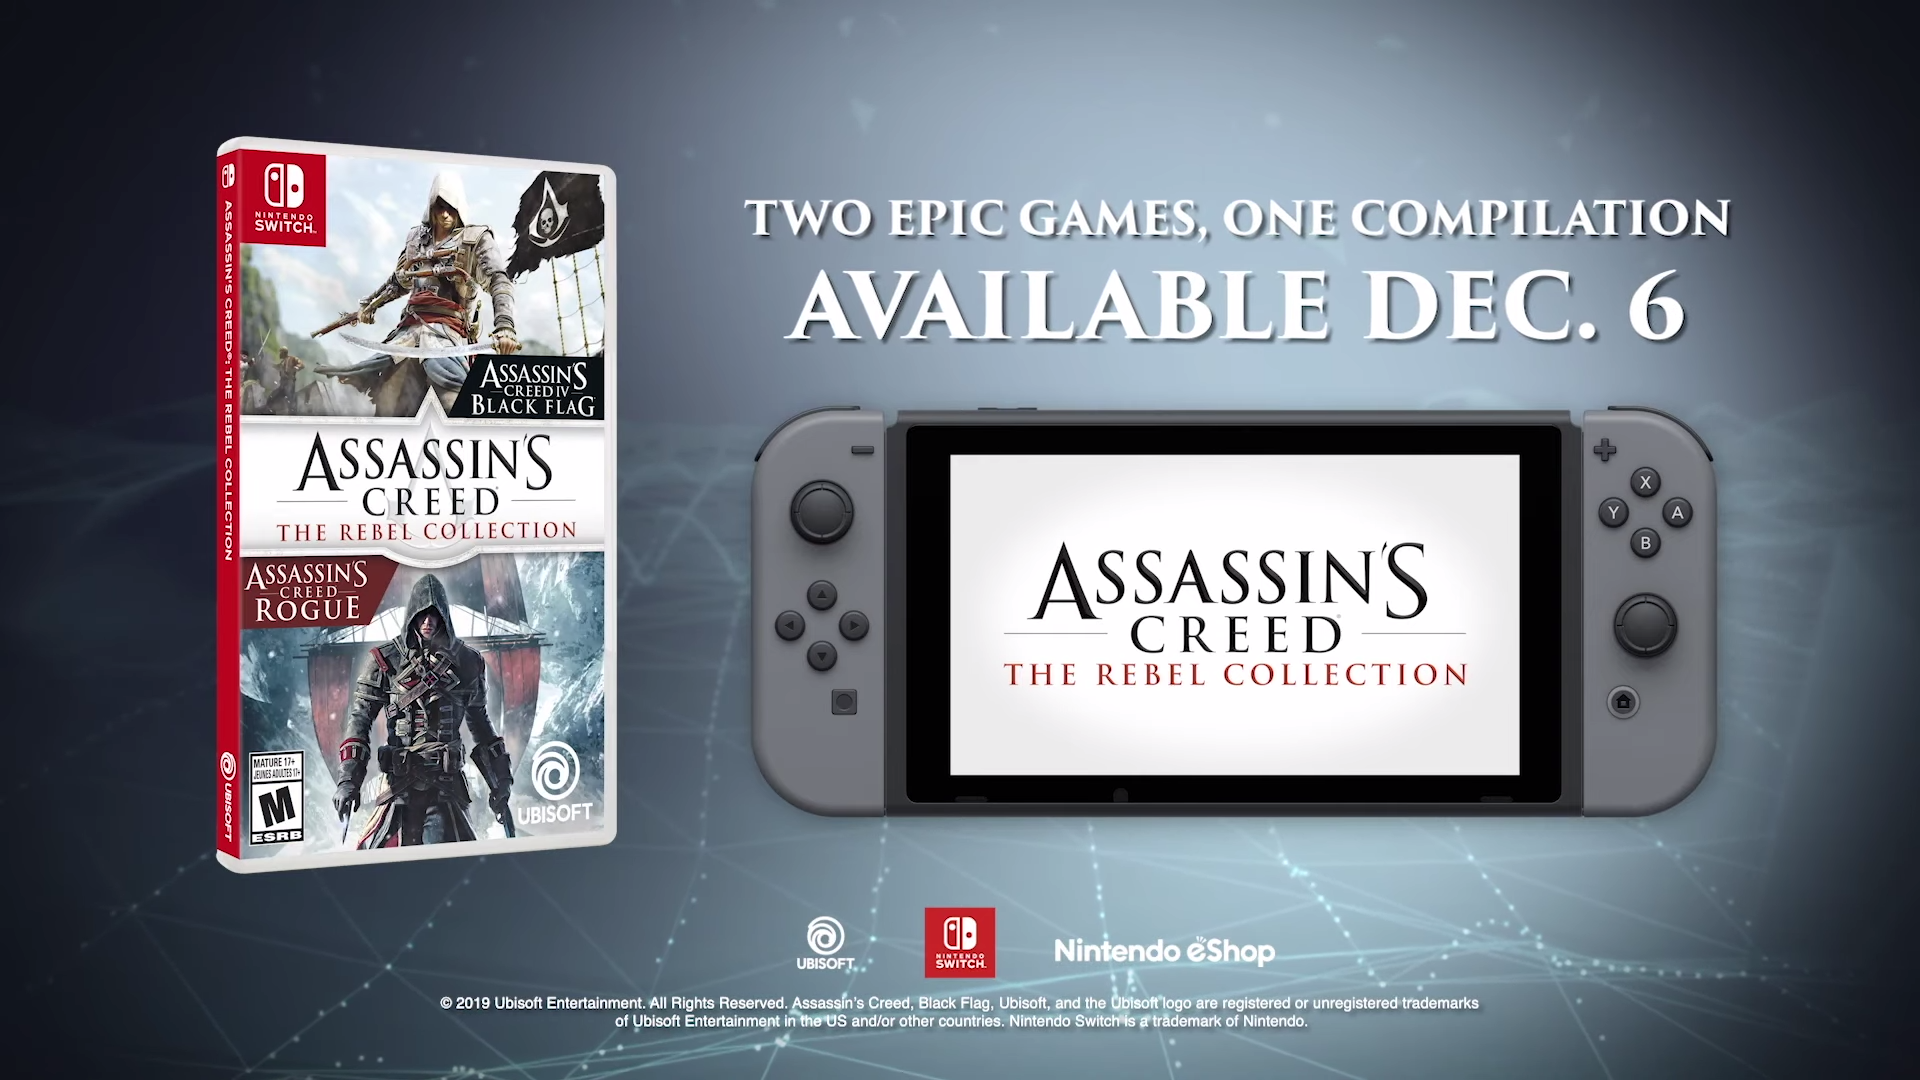 Assassin\'s Creed: The Rebel On Collection Launch 6 Will December